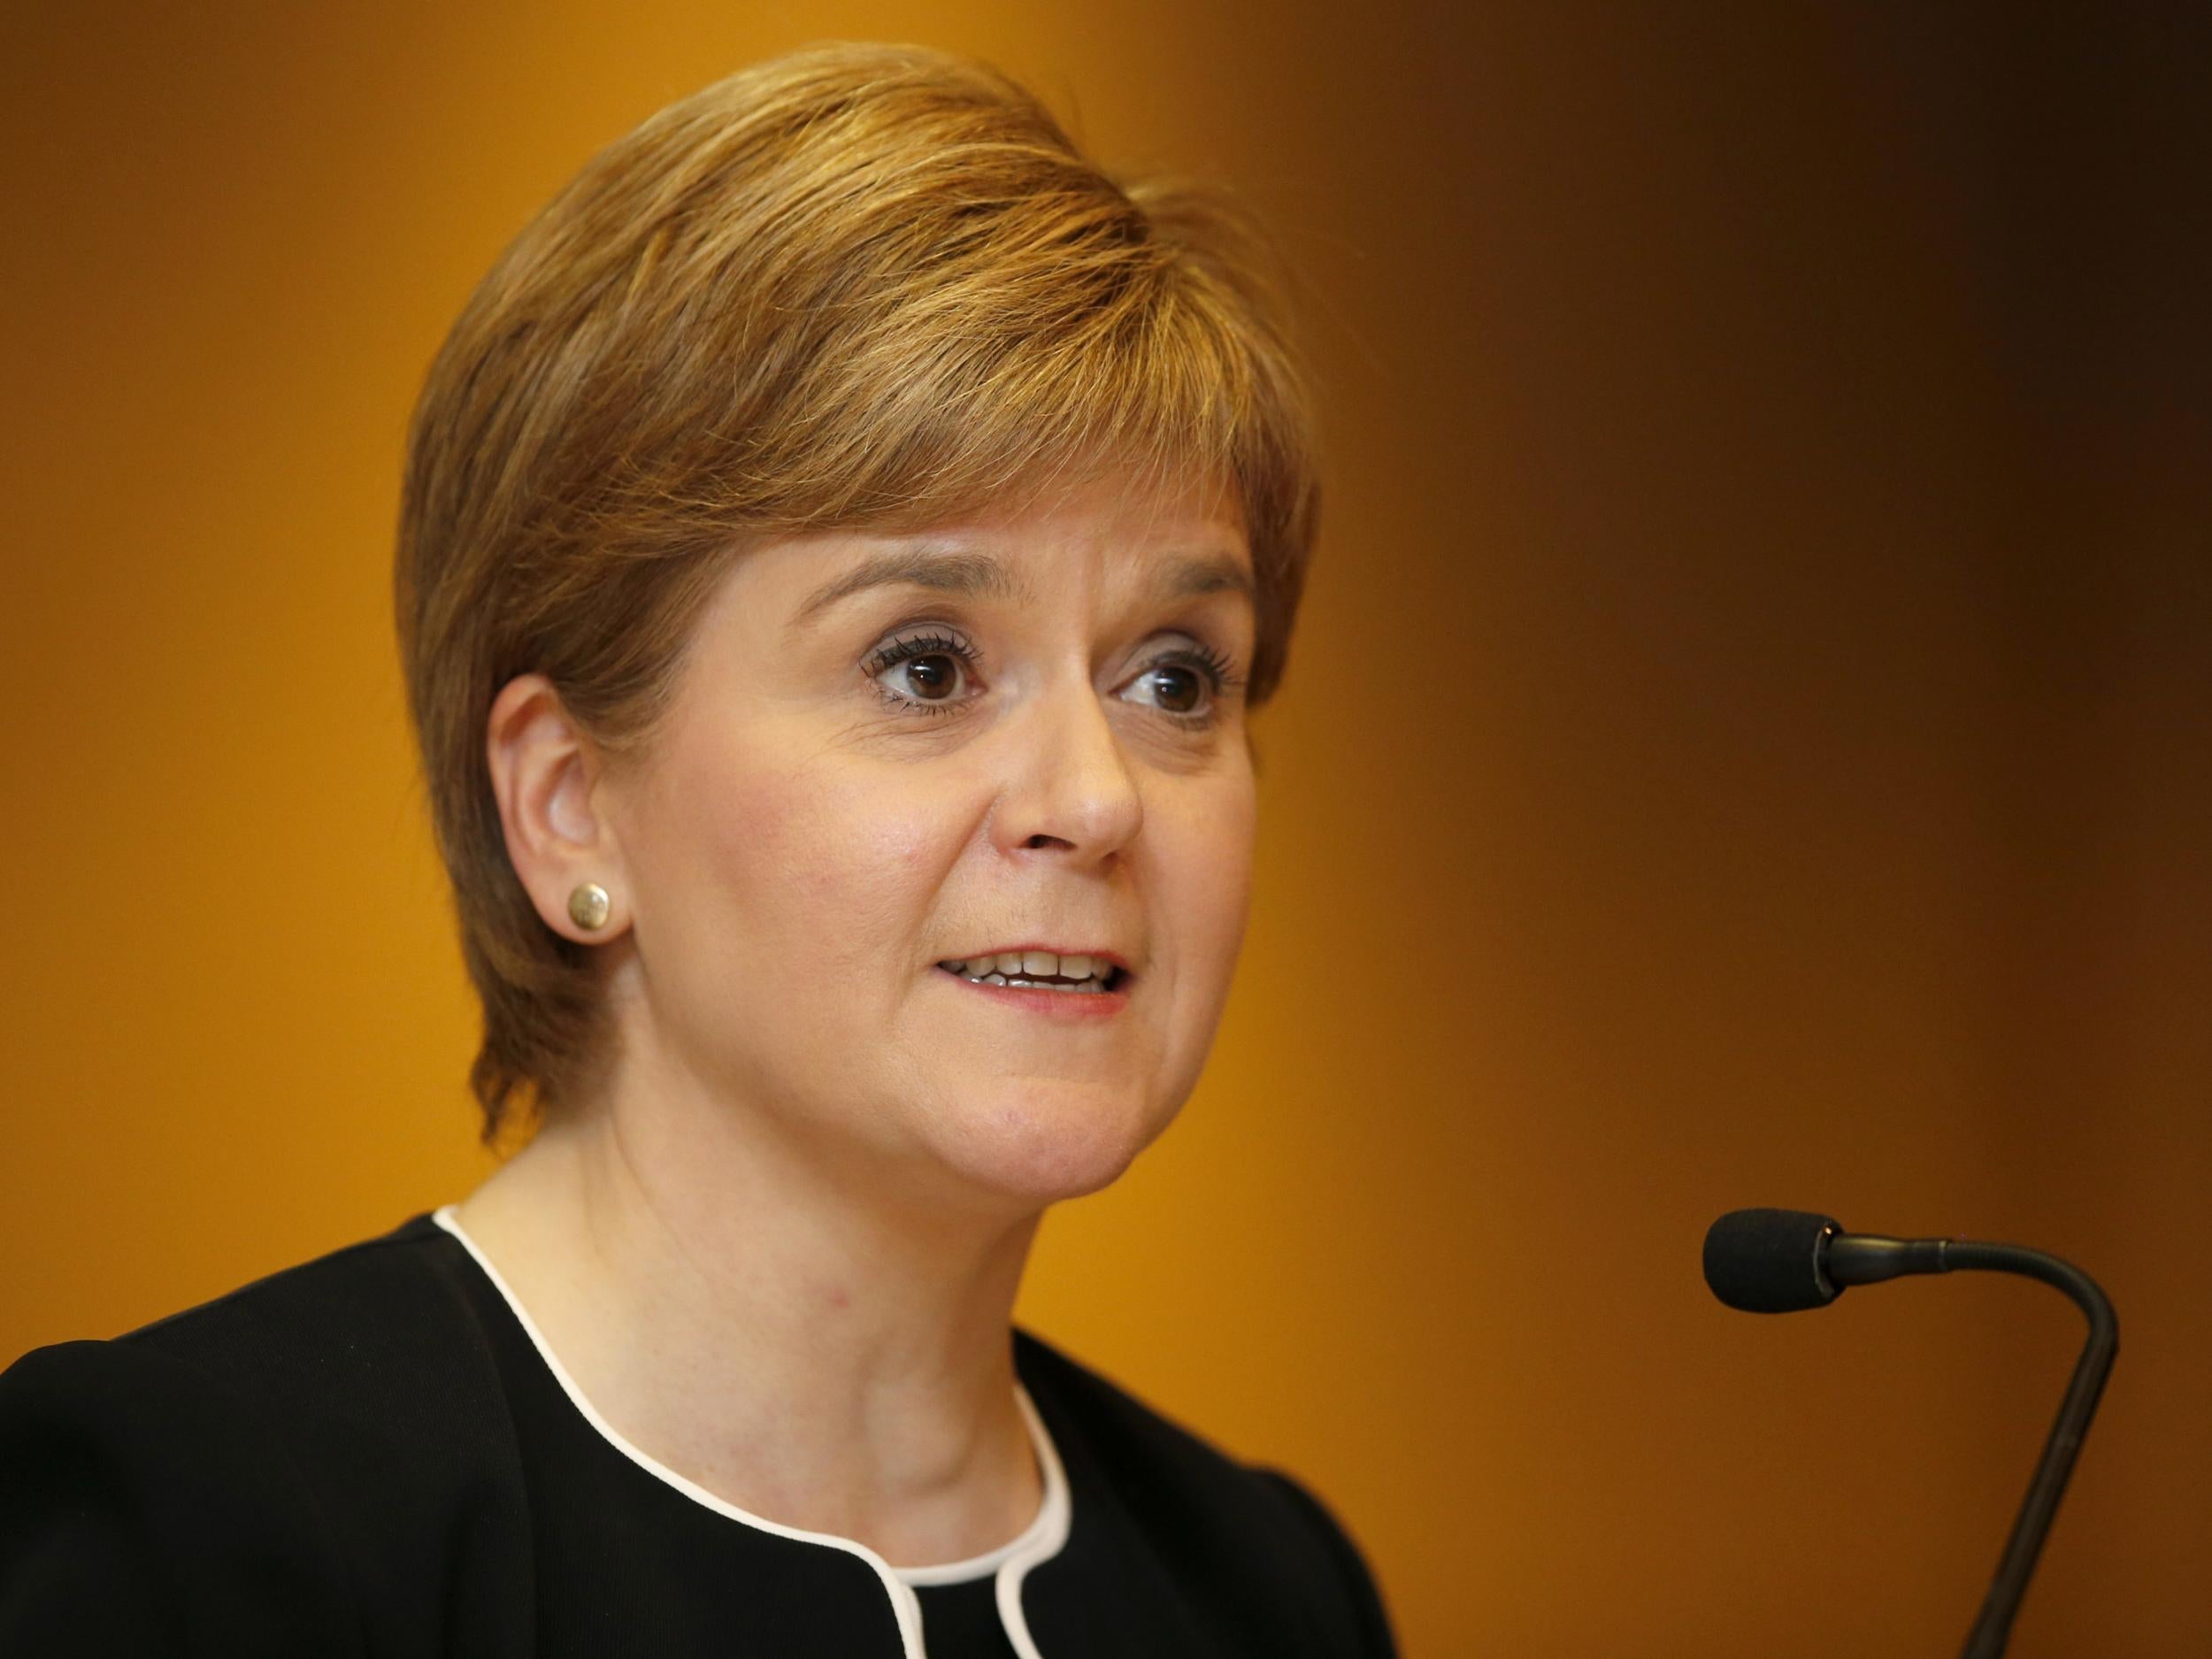 Speaking at First Minister's Questions, Sturgeon said: 'The Autumn Statement starkly set out the cost of Brexit to the UK economy and public finances'